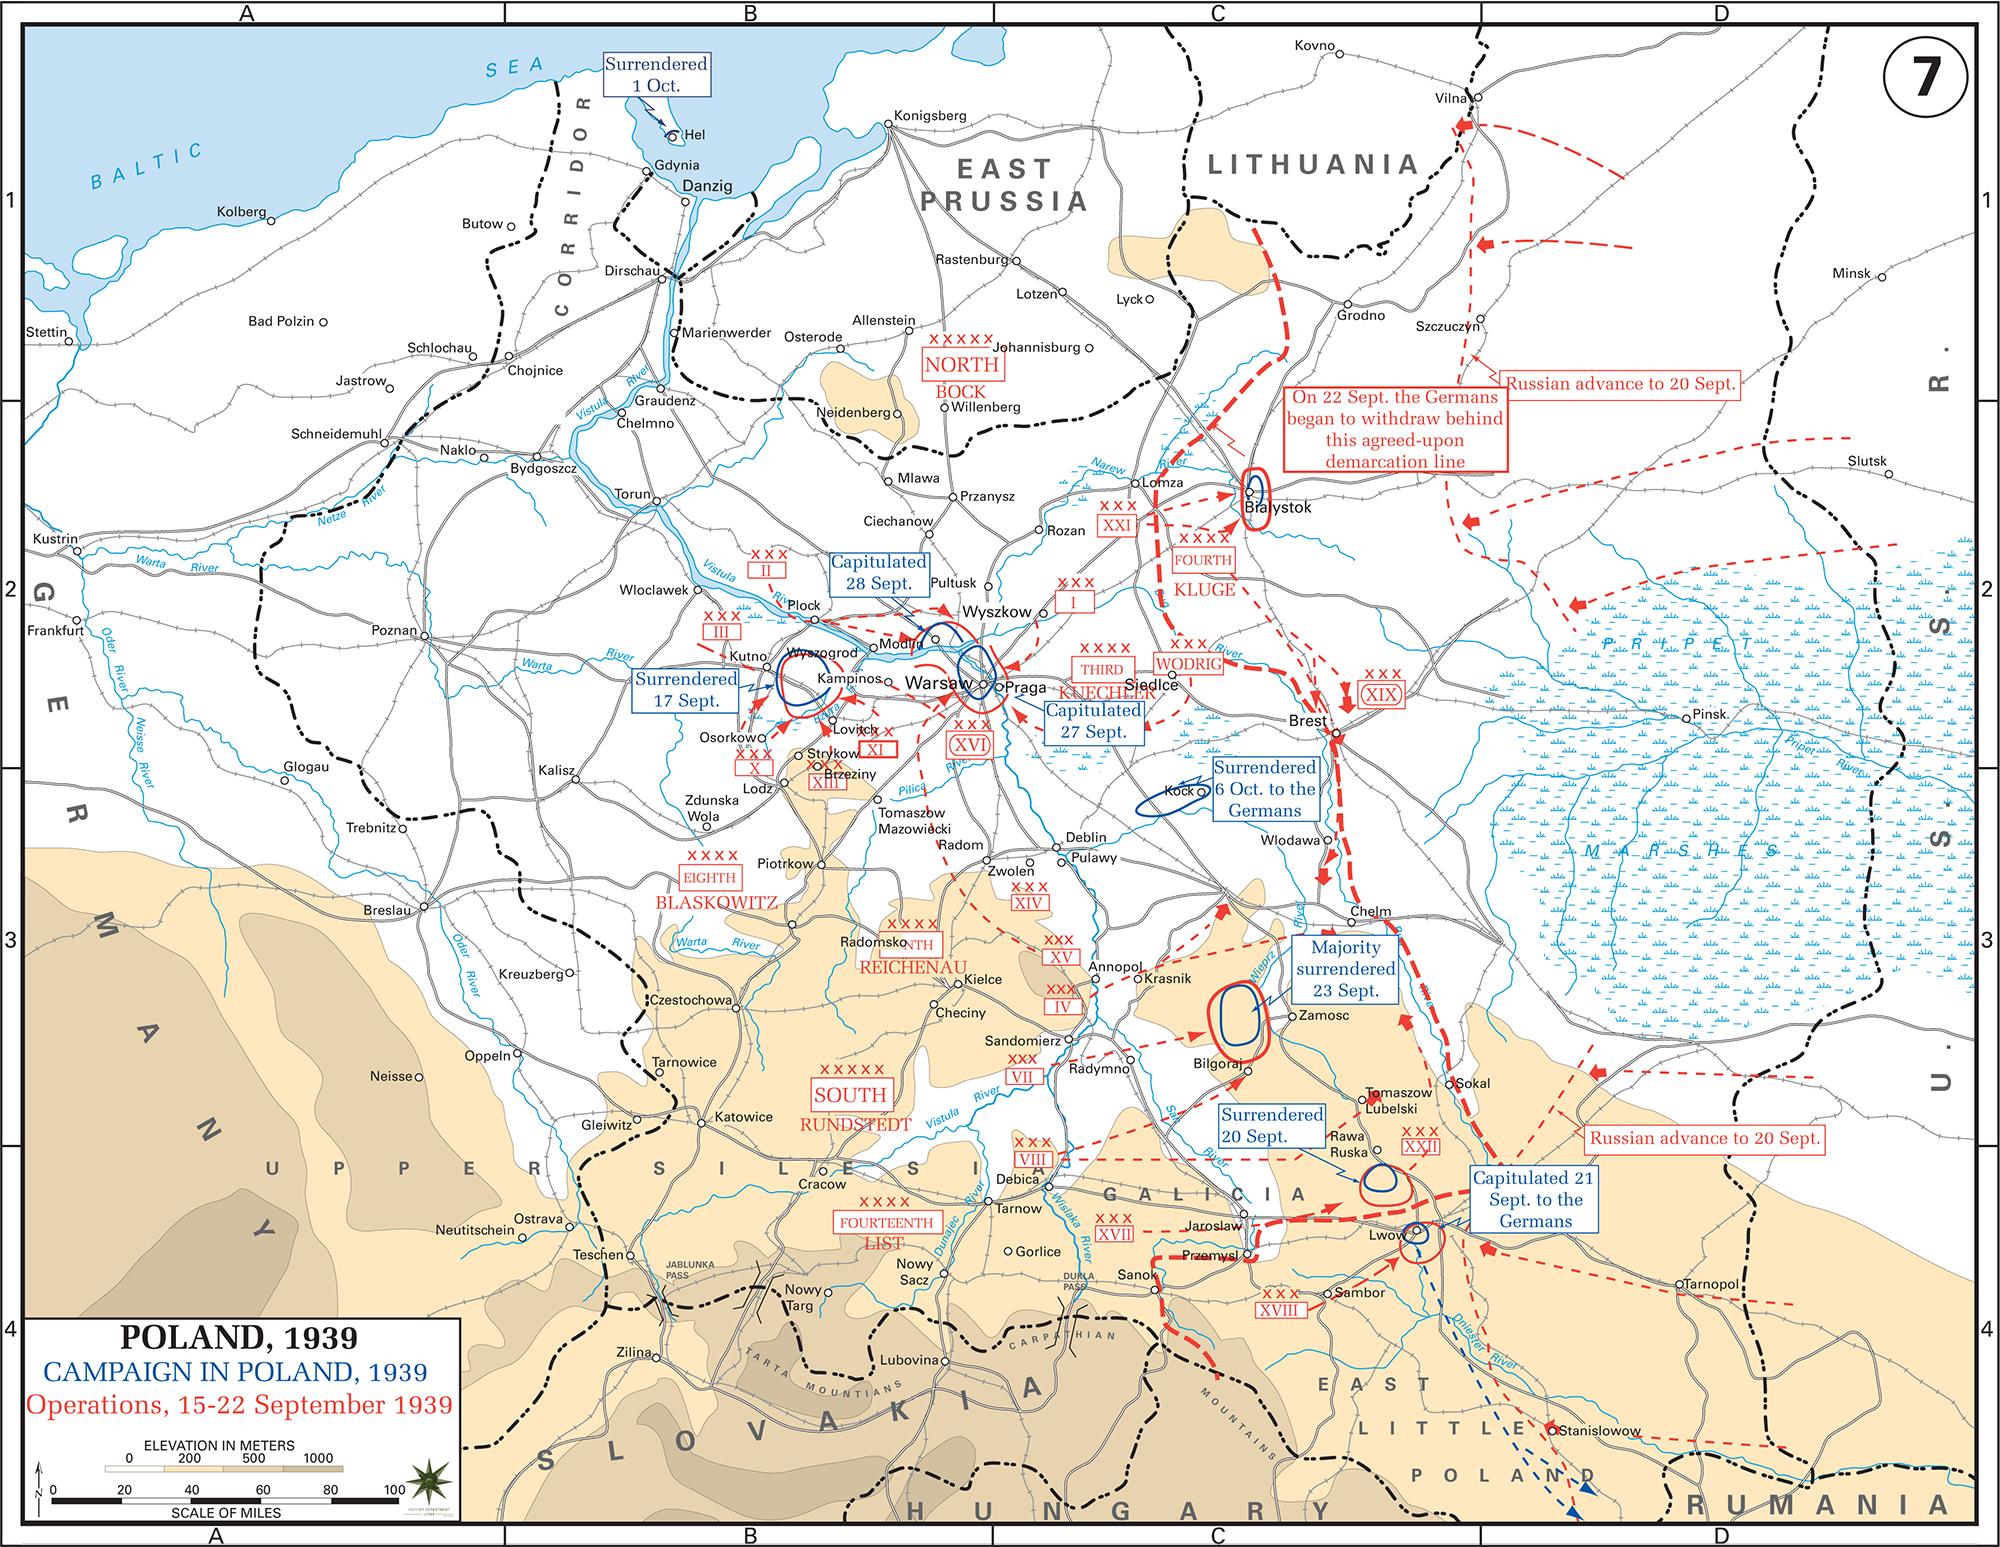 History Map of WWII: Poland 1939 Operations September 15-22, 1939